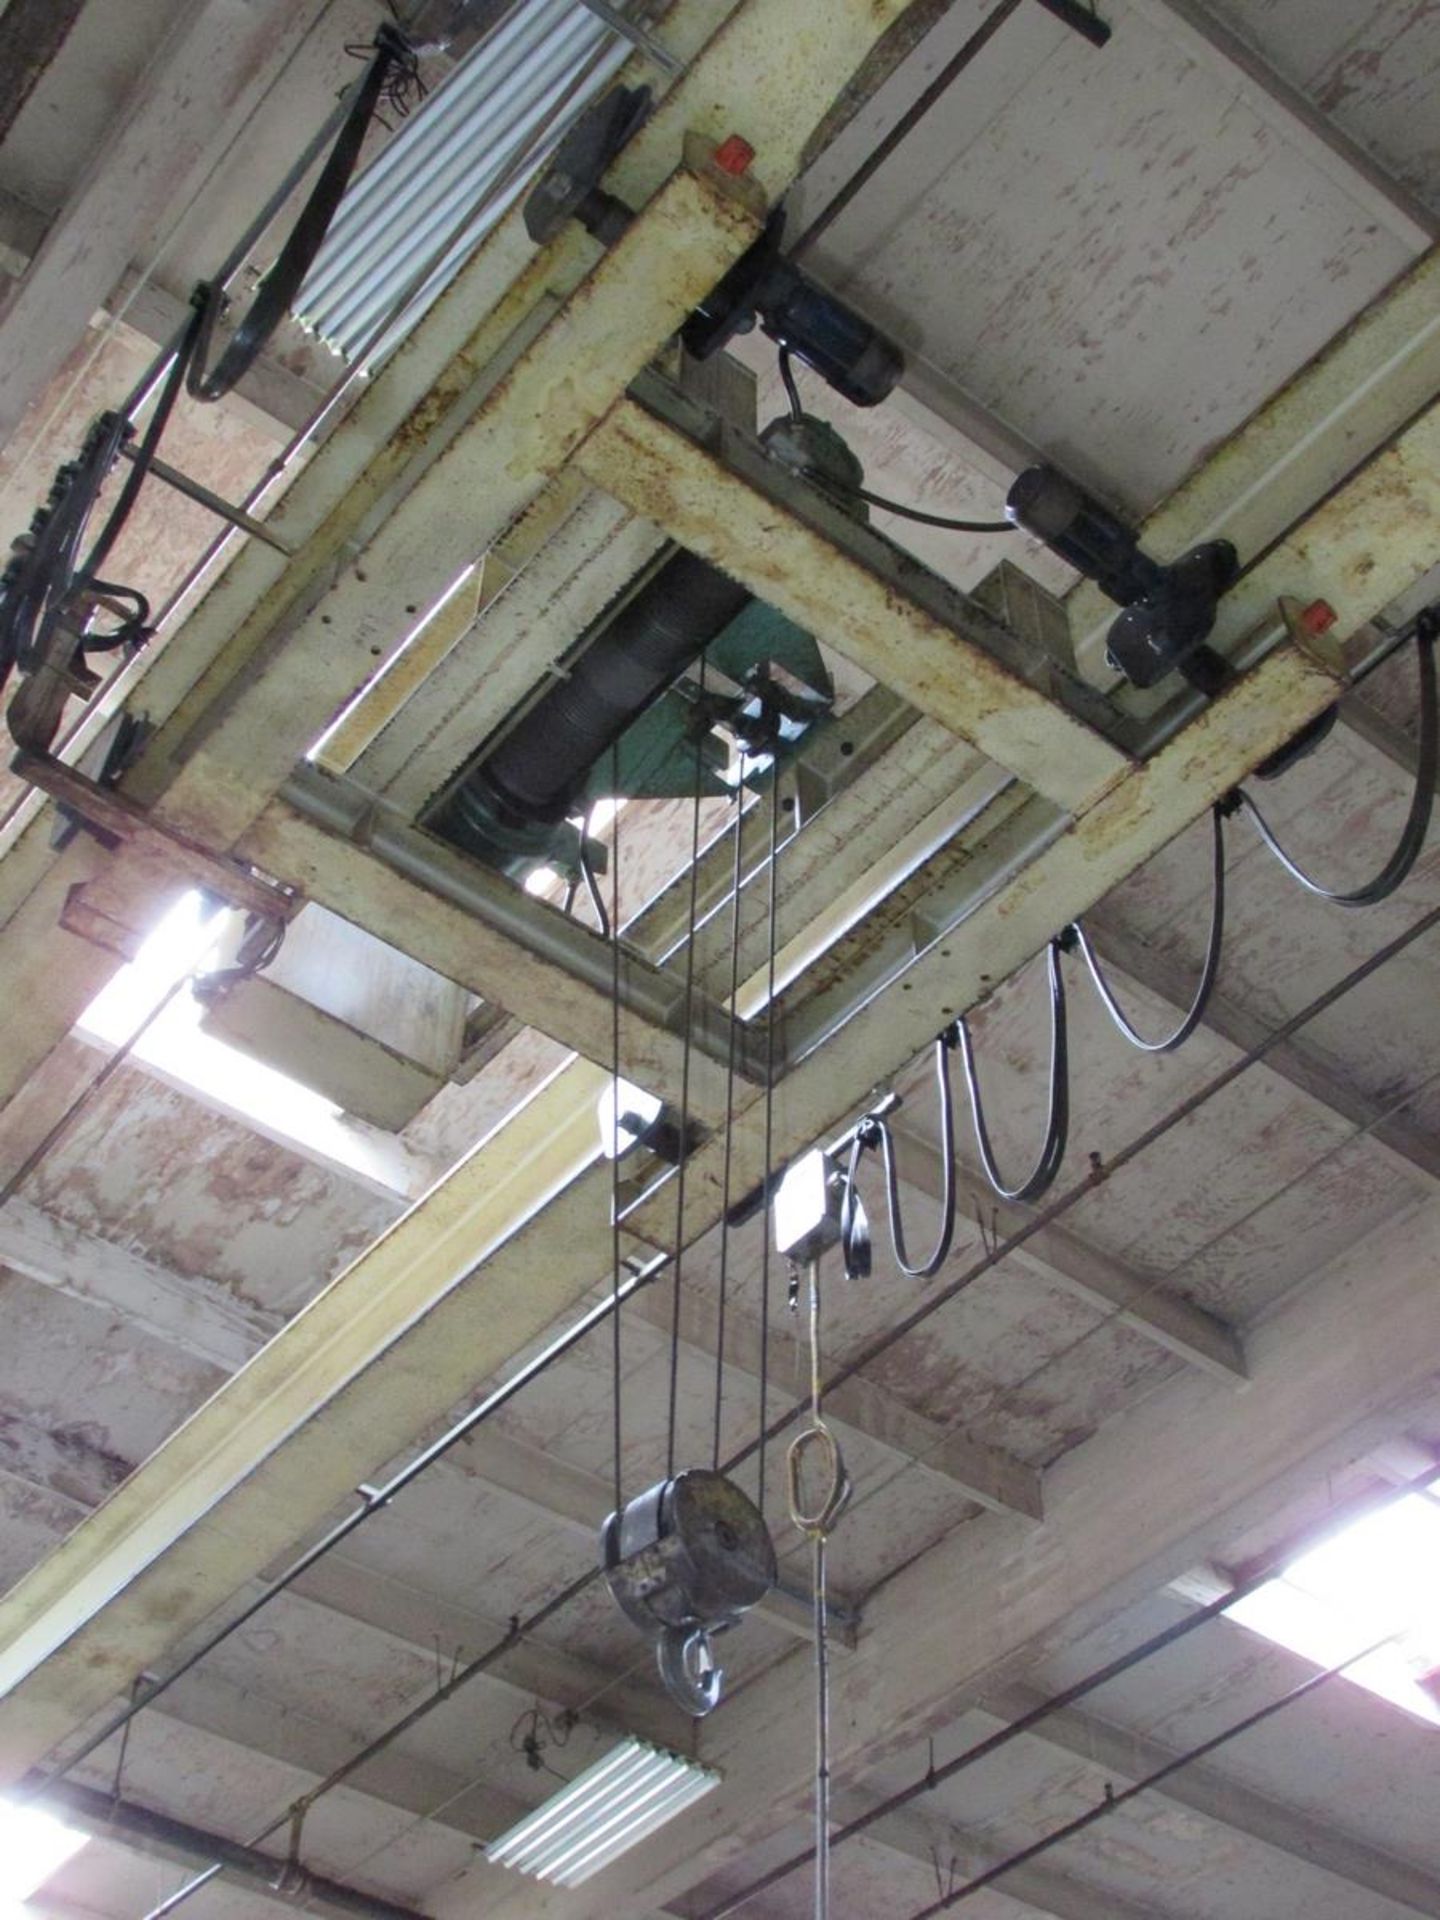 5-TON DOUBLE GIRDER UNDERSLUNG BRIDGE CRANE, APPROX. 56' SPAN, P&H BRAIDED CABLE HOIST AND TROLLY, - Image 7 of 11